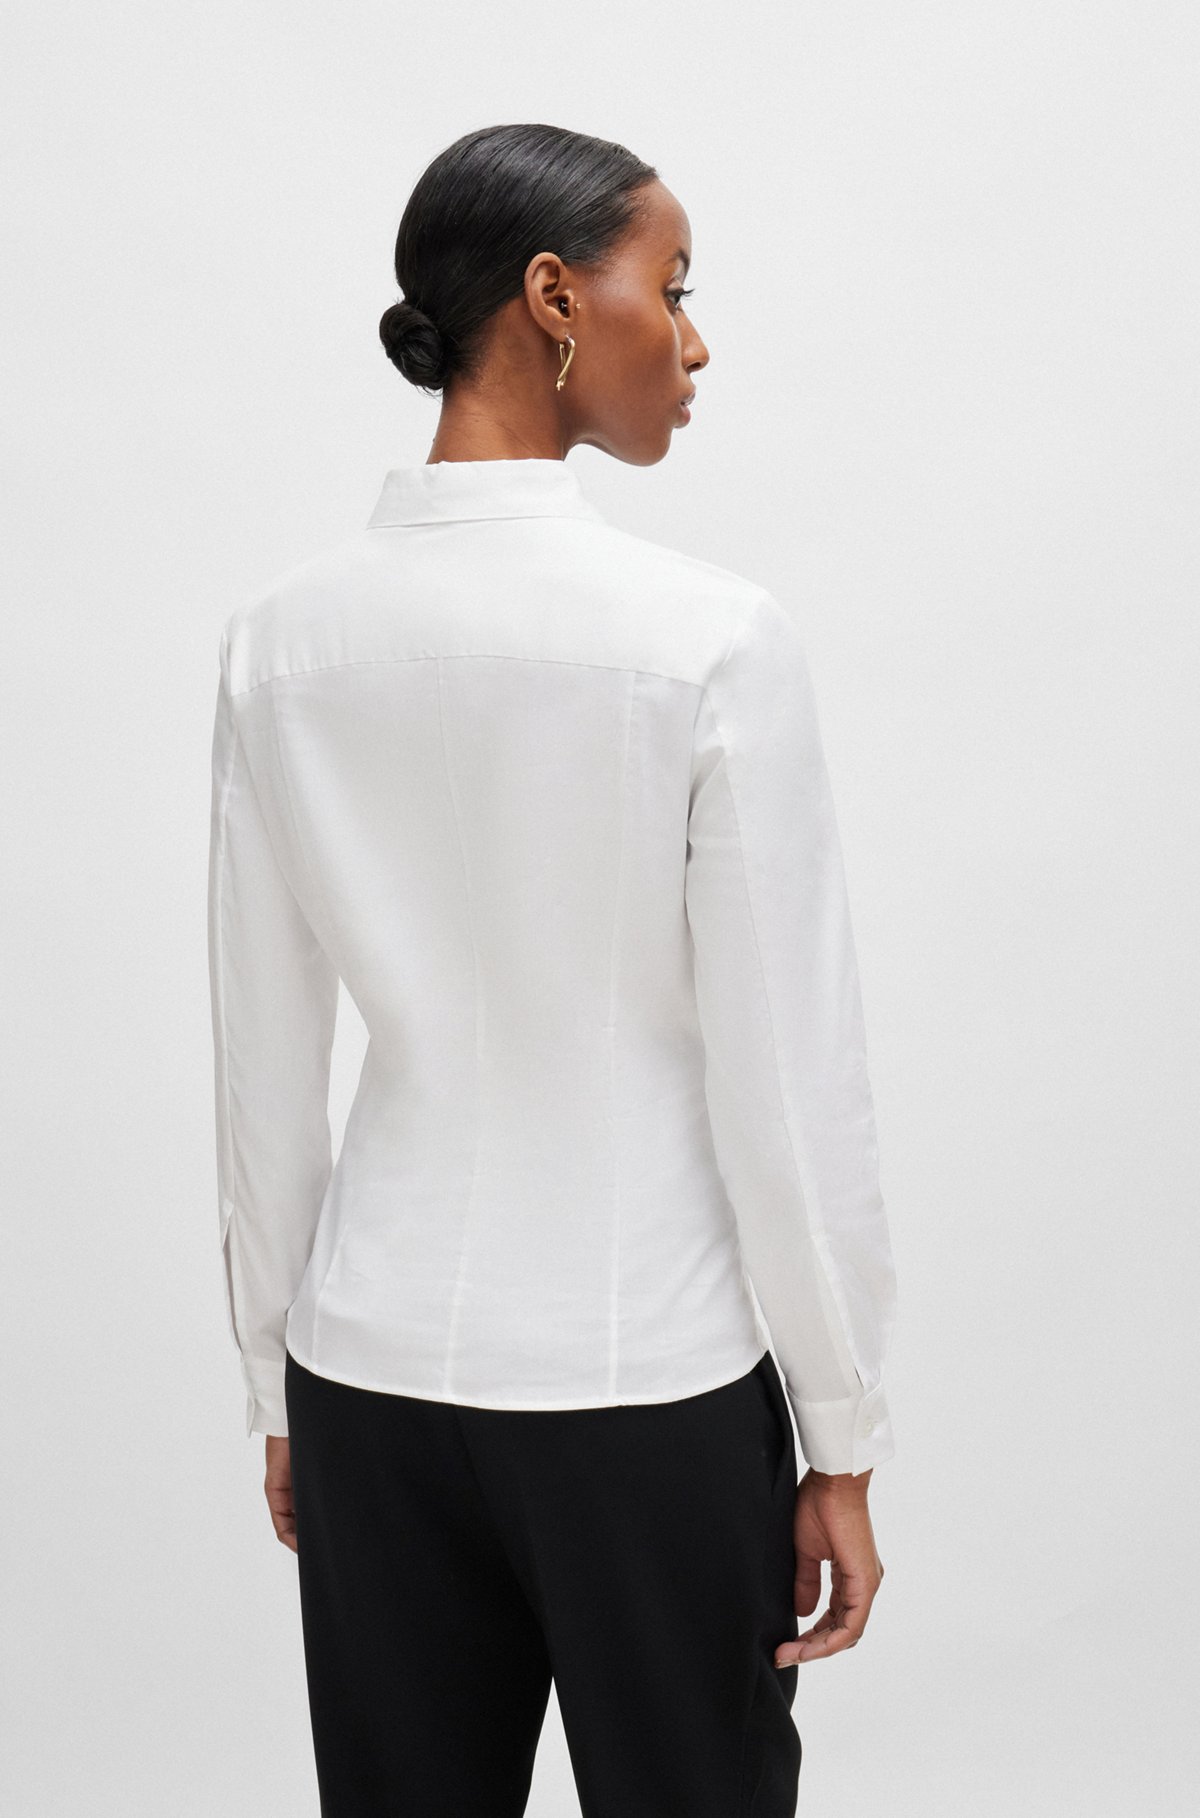 Slim-fit blouse in a cotton blend, White